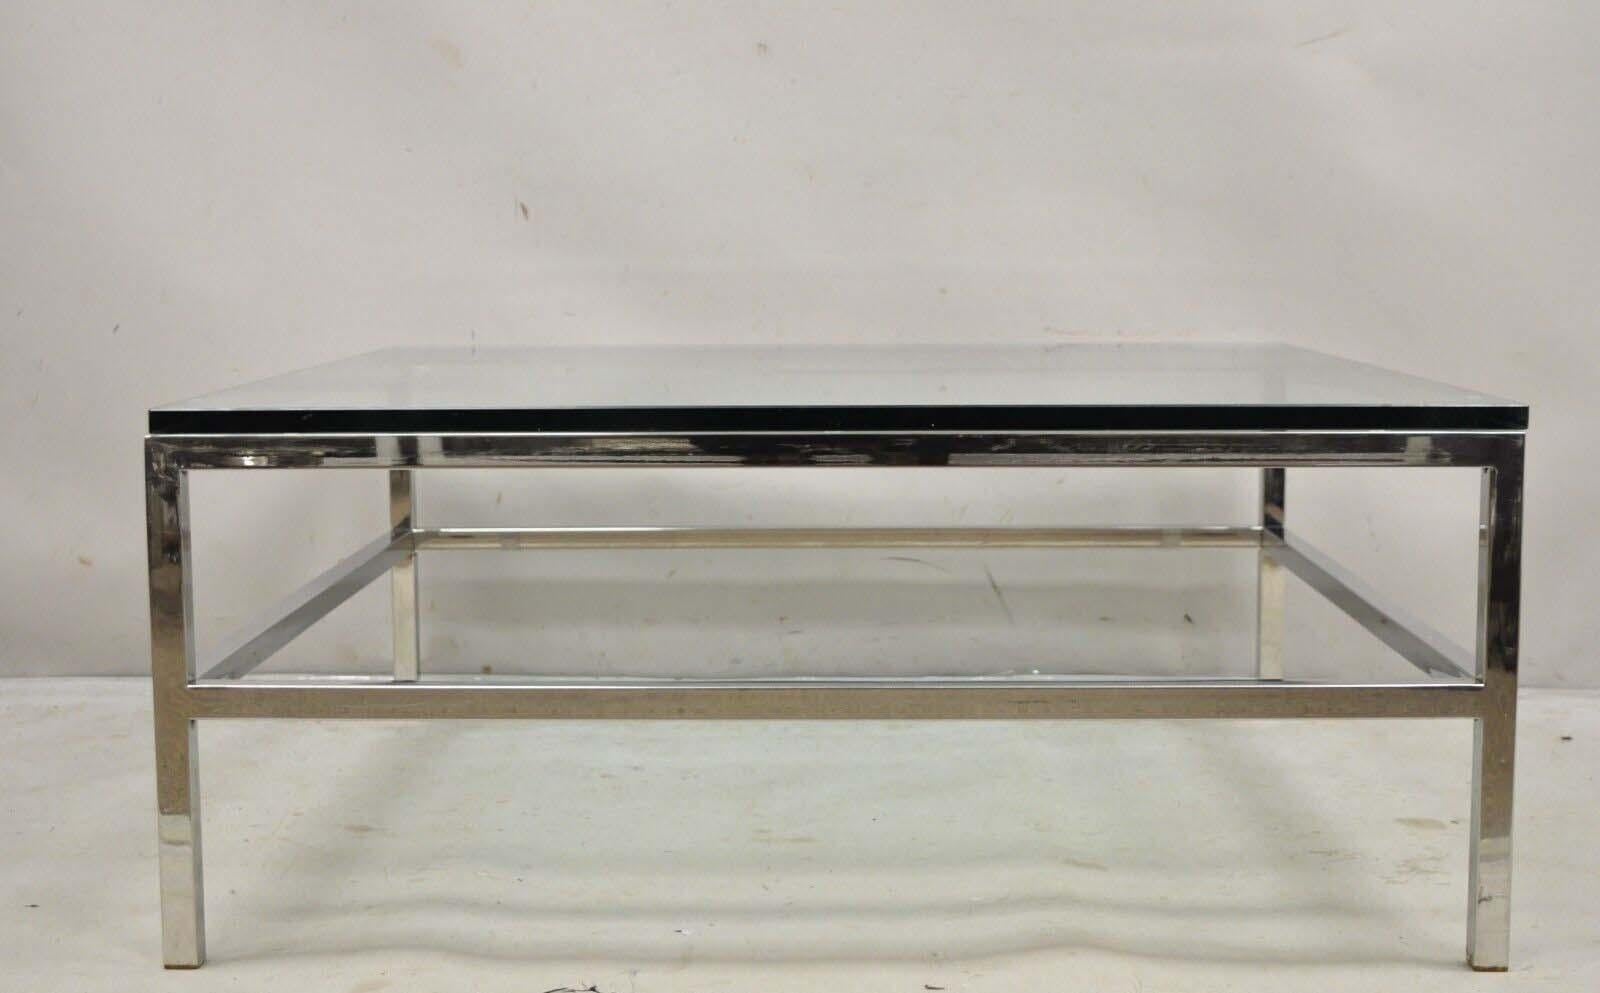 Vintage Mid Century Modern Milo Baughman Style Chrome & Glass Square Coffee Table. Item features a thick square glass top, polished chrome frame with stretcher base, clean modernist lines, great style and form. Circa  Late 20th Century.